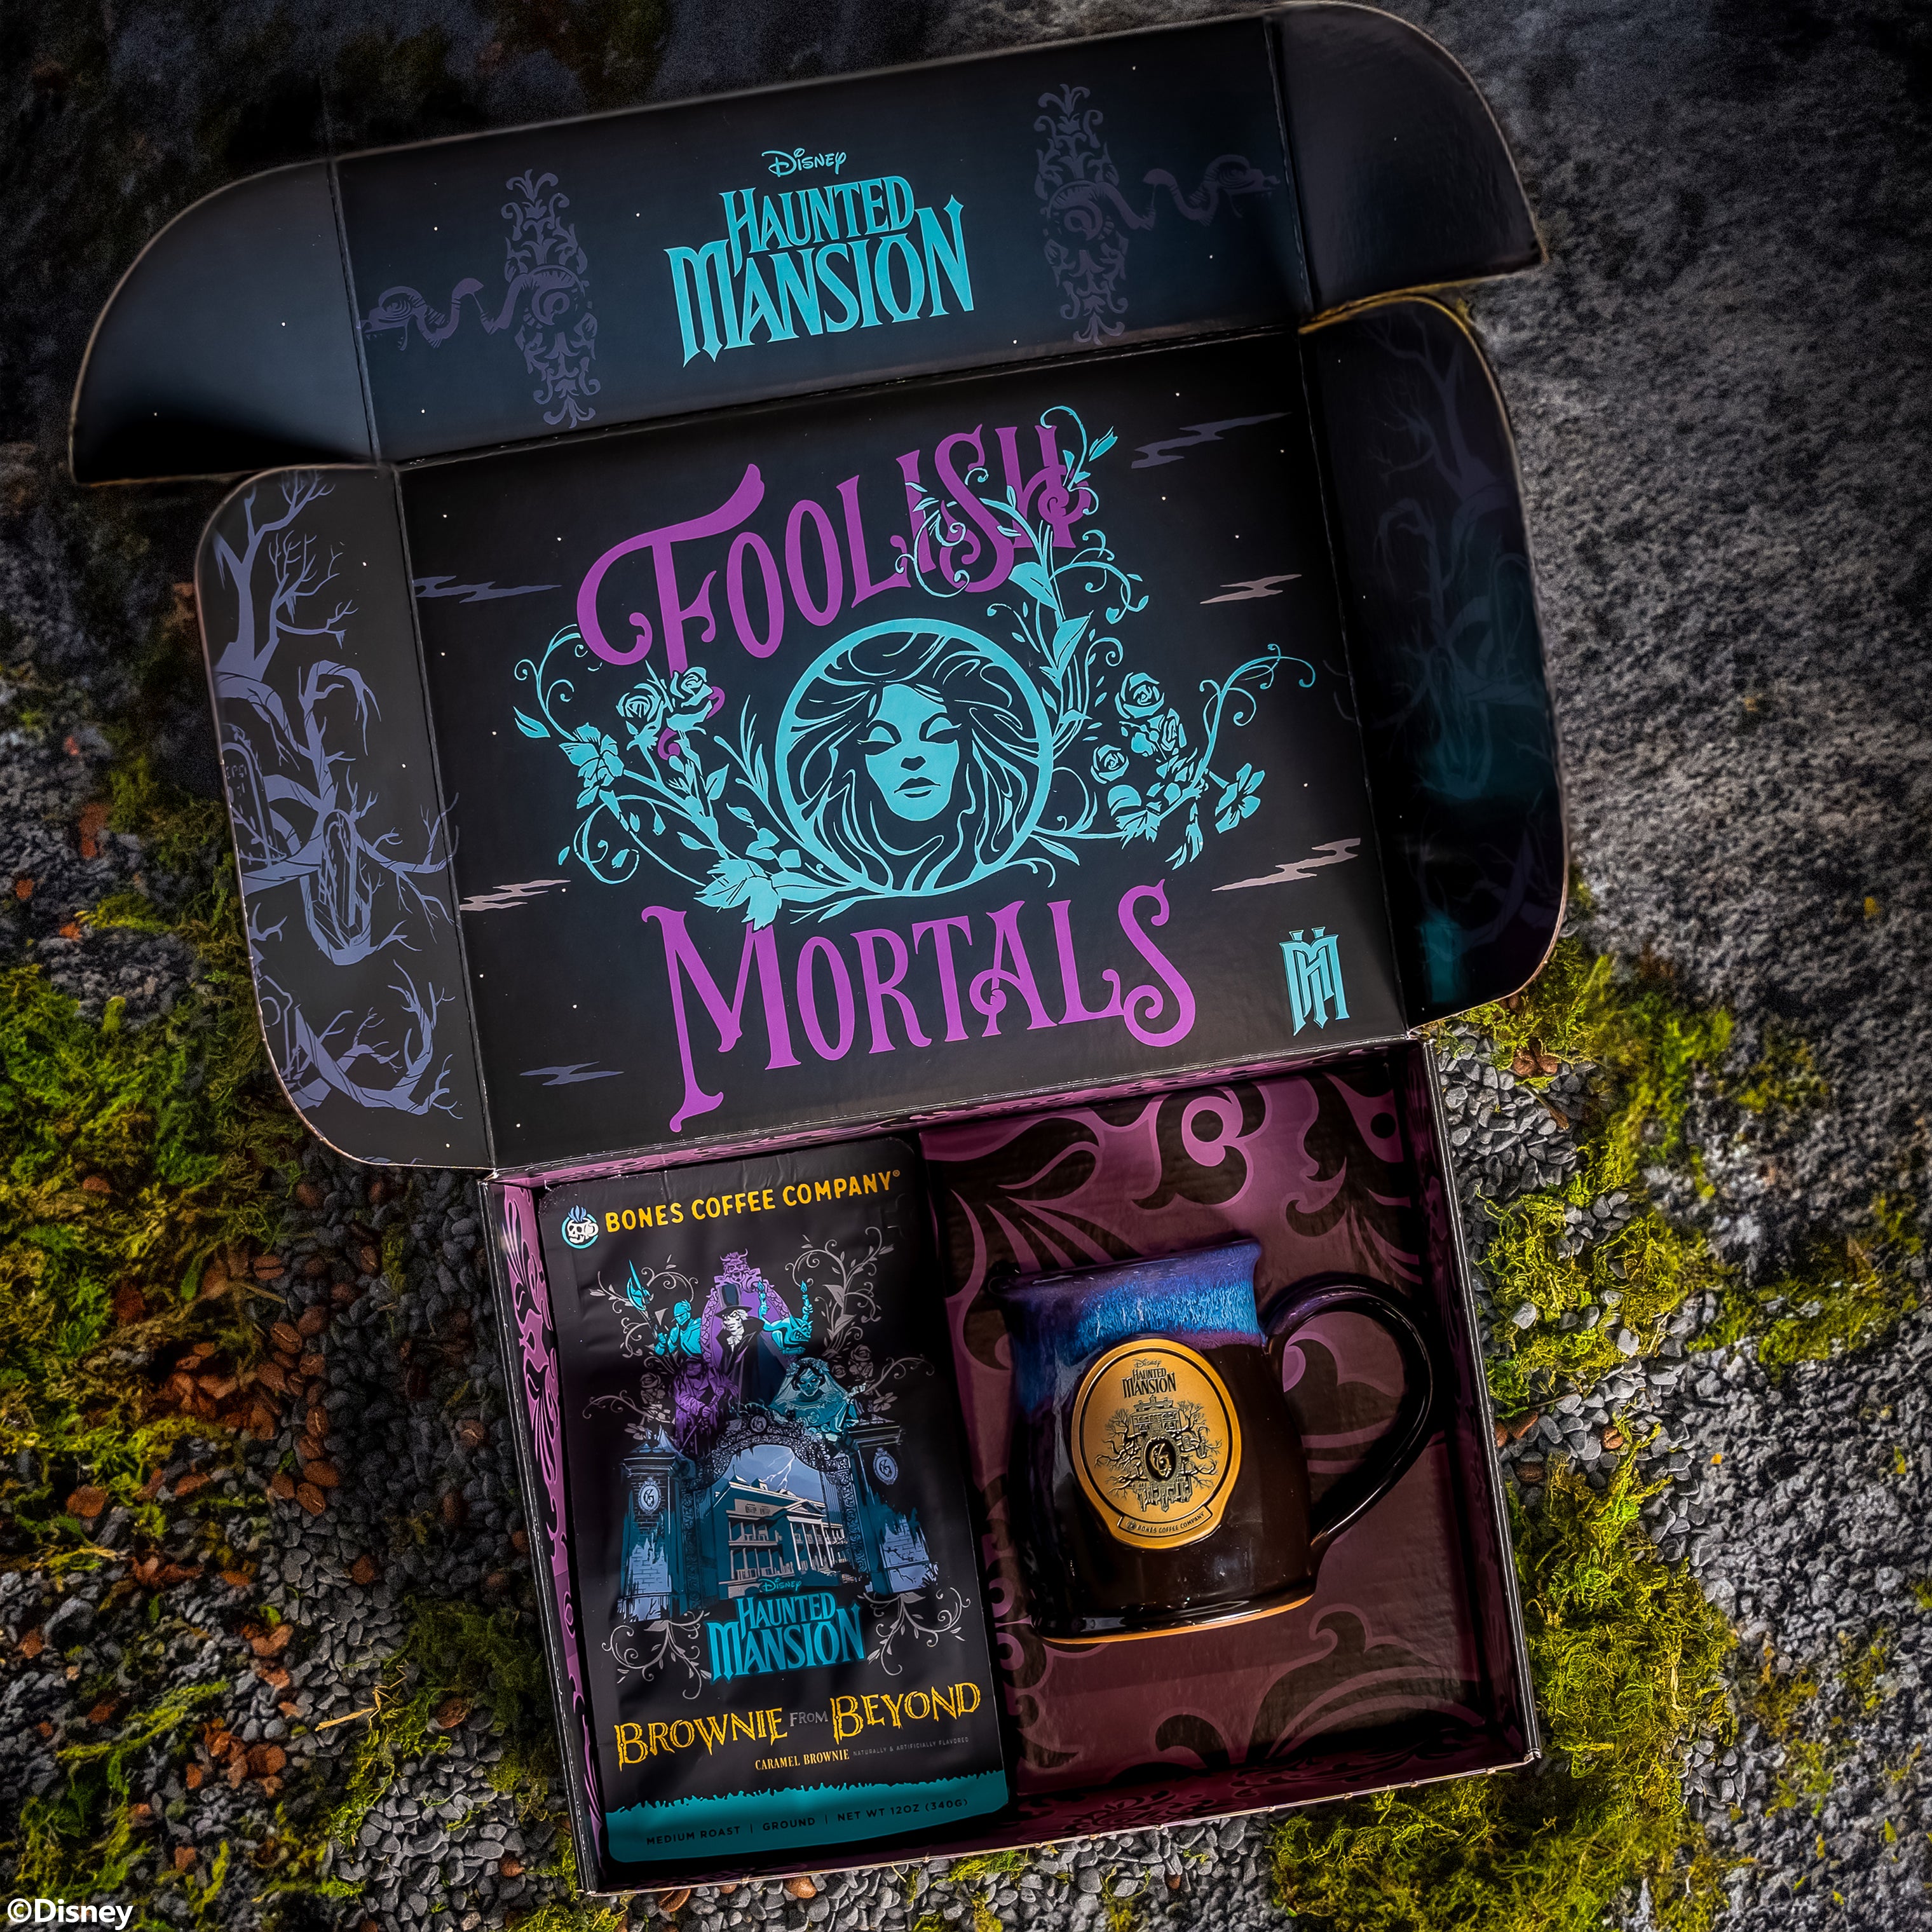 The opened collector's box inspired by Disney Haunted Mansion. It contains a black mug with a white glaze on top of it and a 12 ounce bag of caramel brownie flavored coffee named Brownie From Beyond. The top of the box says Foolish Mortals.